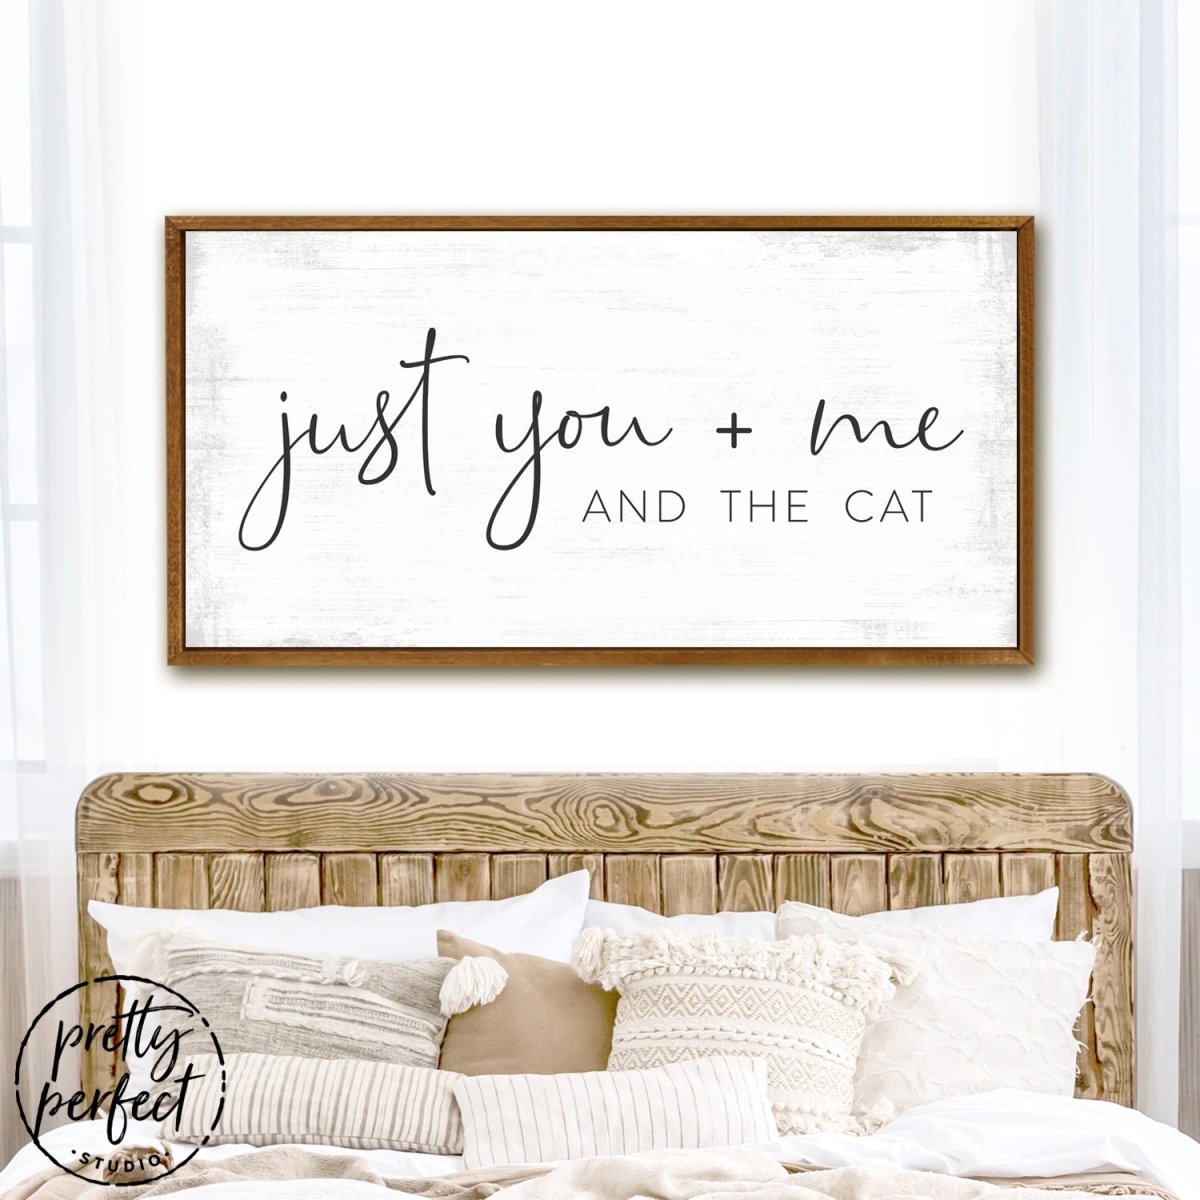 Just You Me And The Cat Sign Above Bed - Pretty Perfect Studio